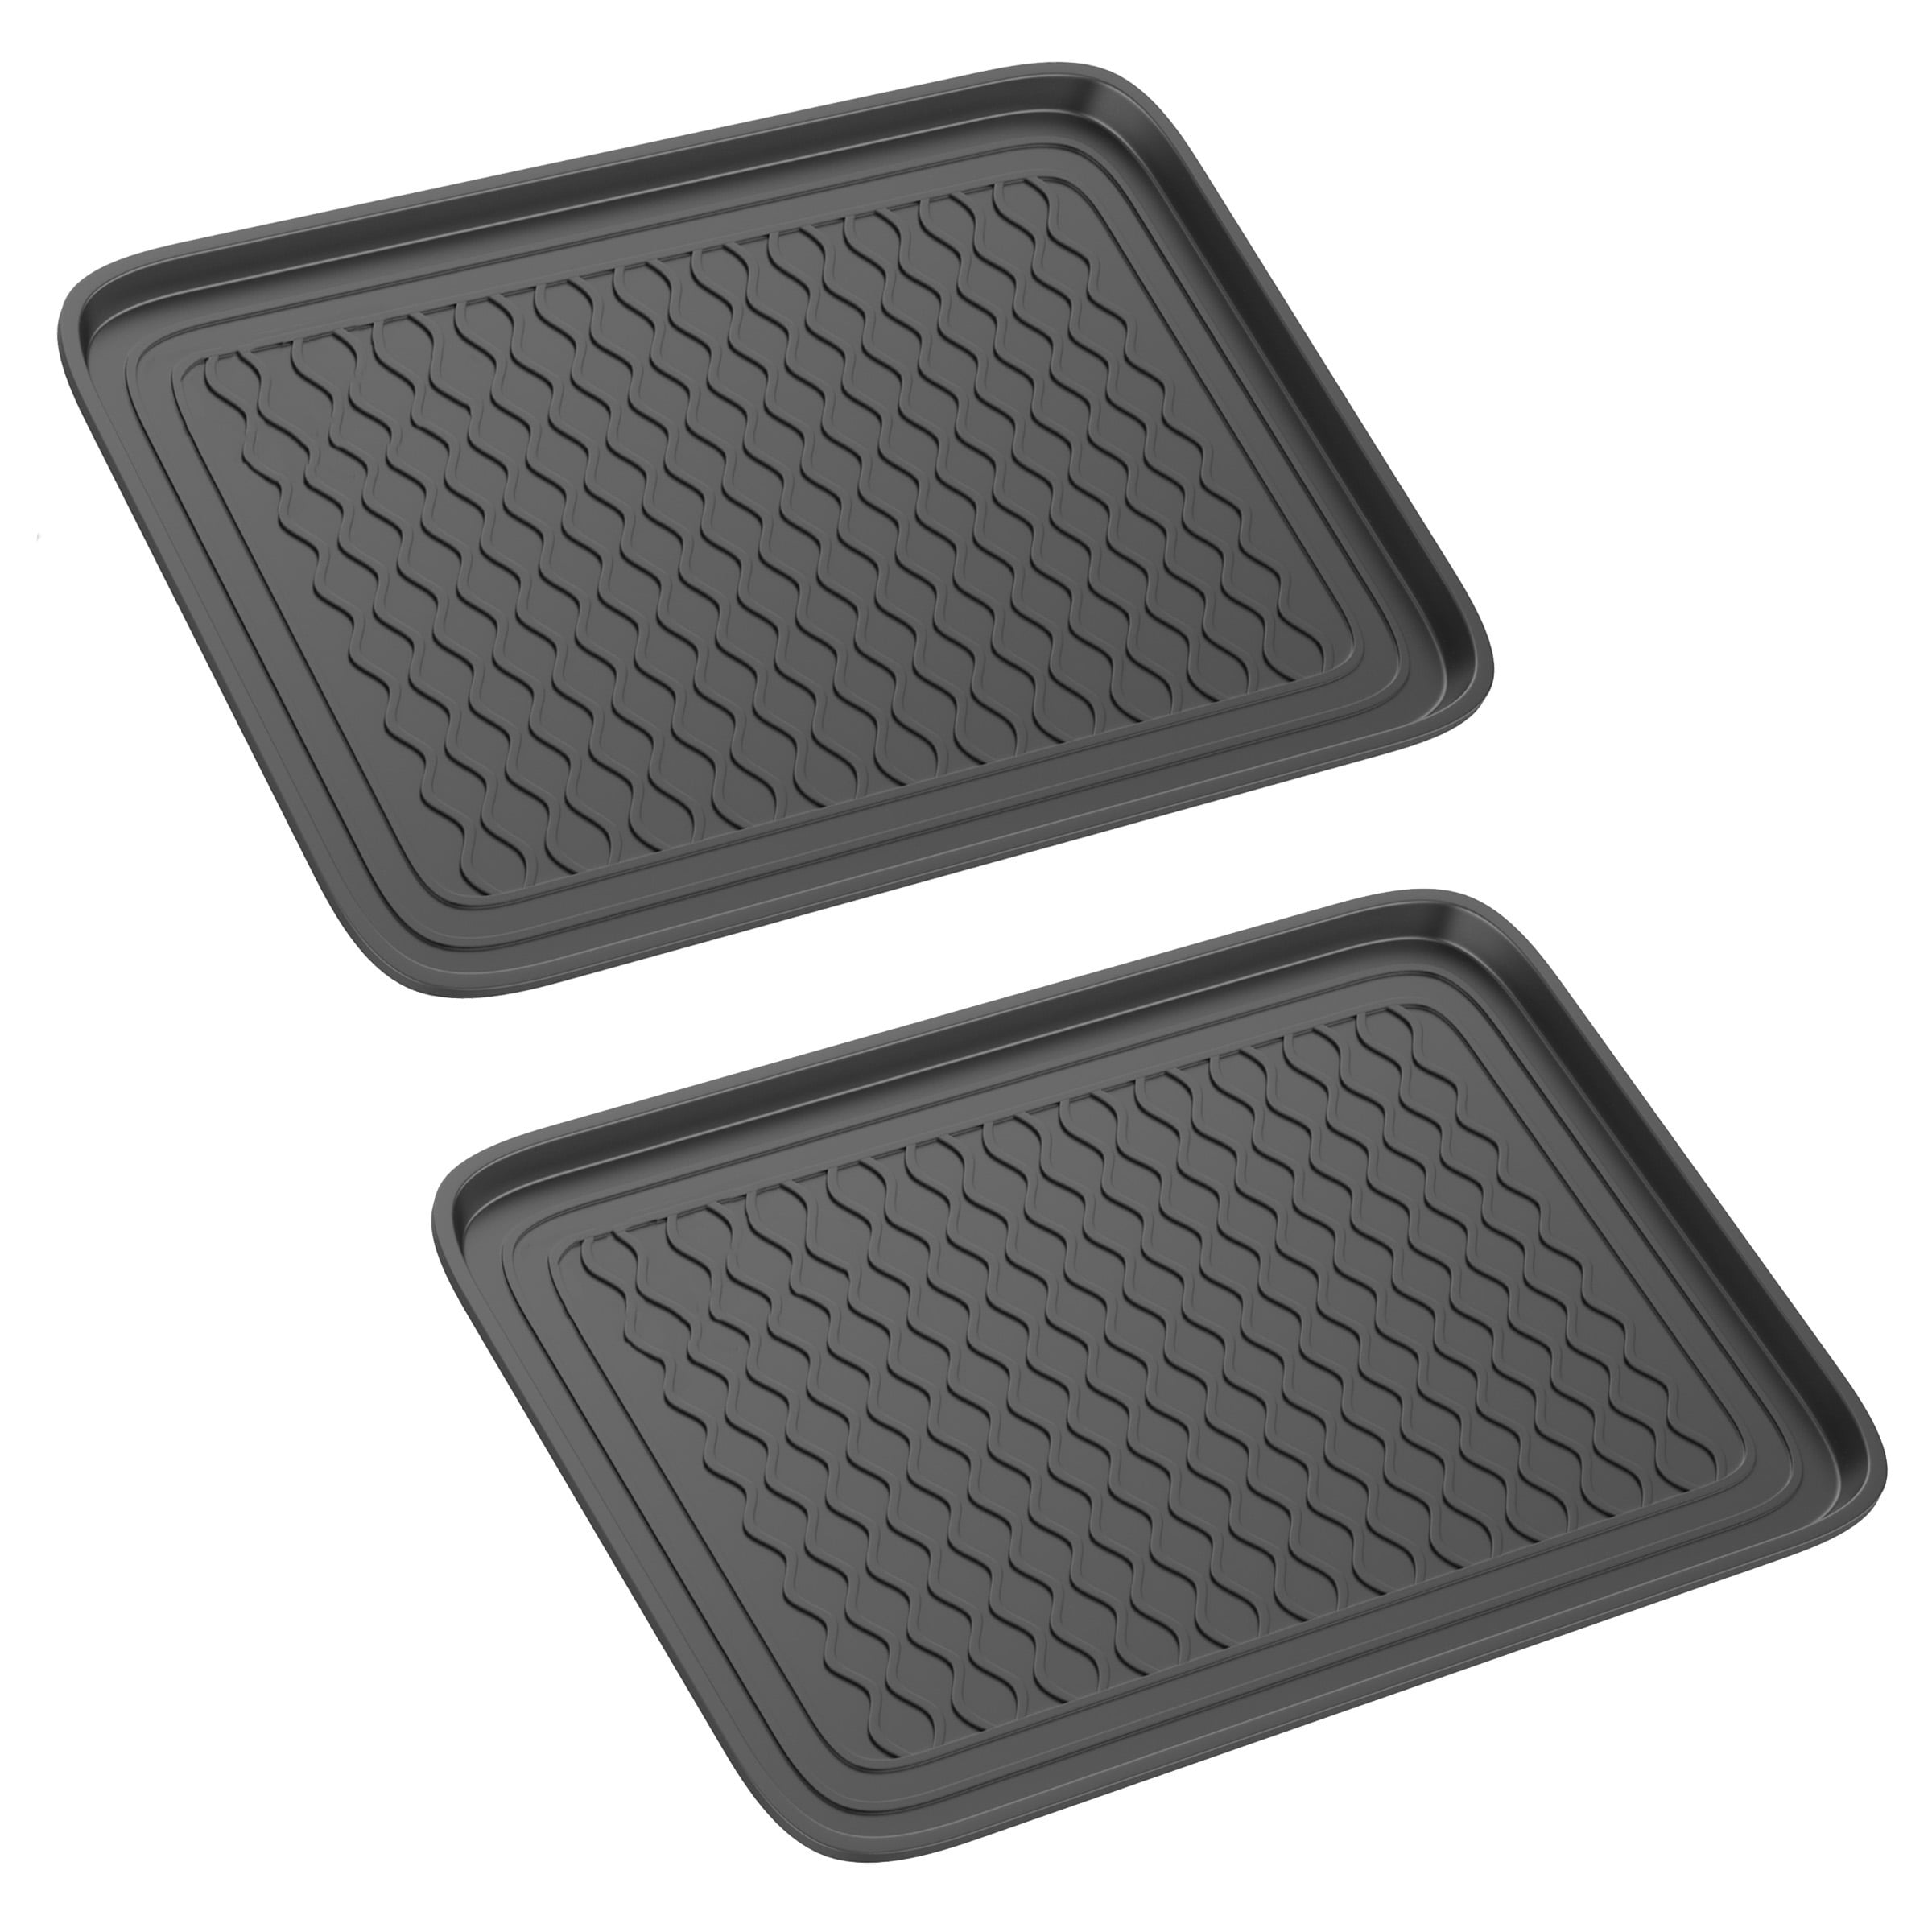 Stalwart All Weather Boot Tray in Multiple Sizes (Set of Two, Black)